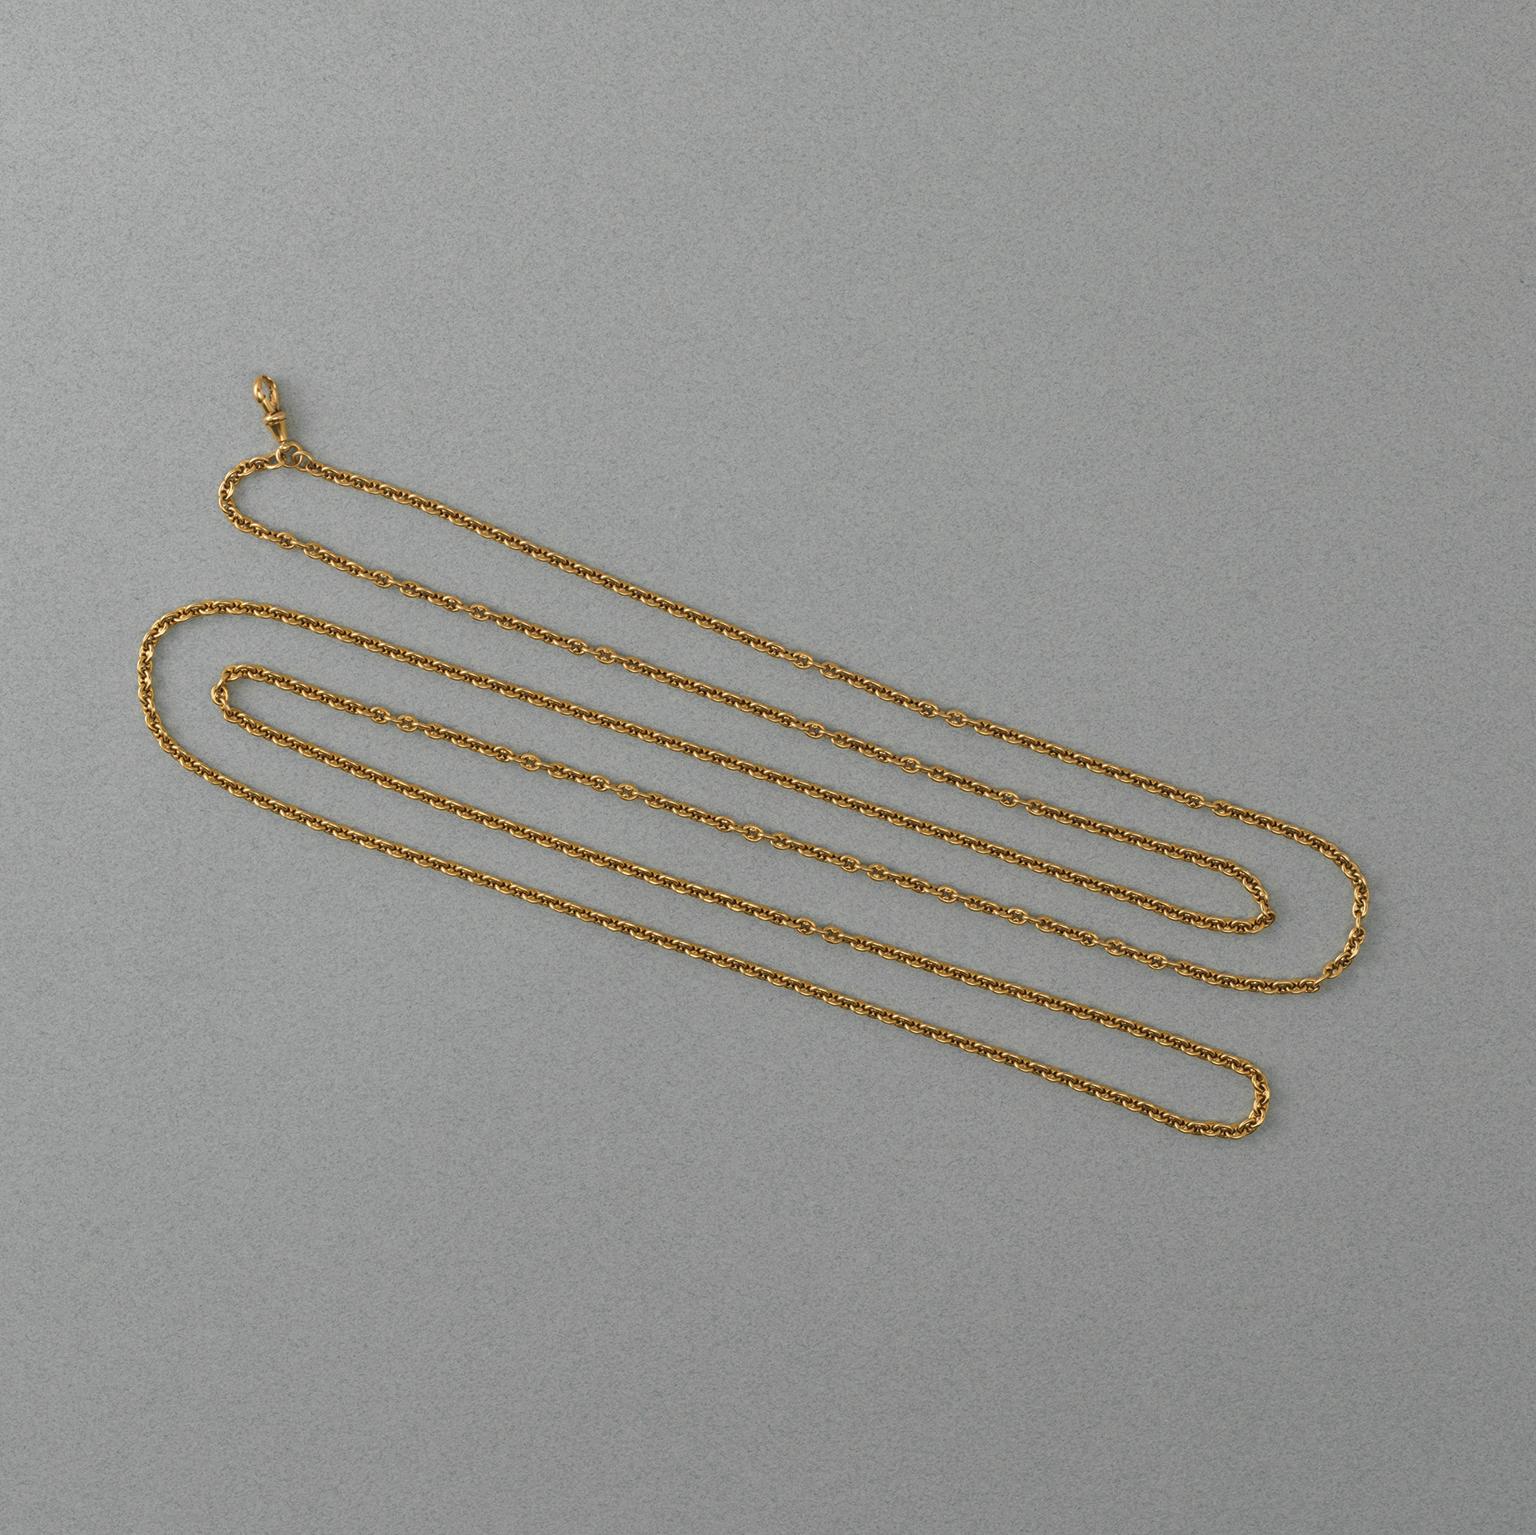 An 18 carat gold long chain with a mariner link, circa 1900, England.

weight: 77.69 grams
length: 162 cm